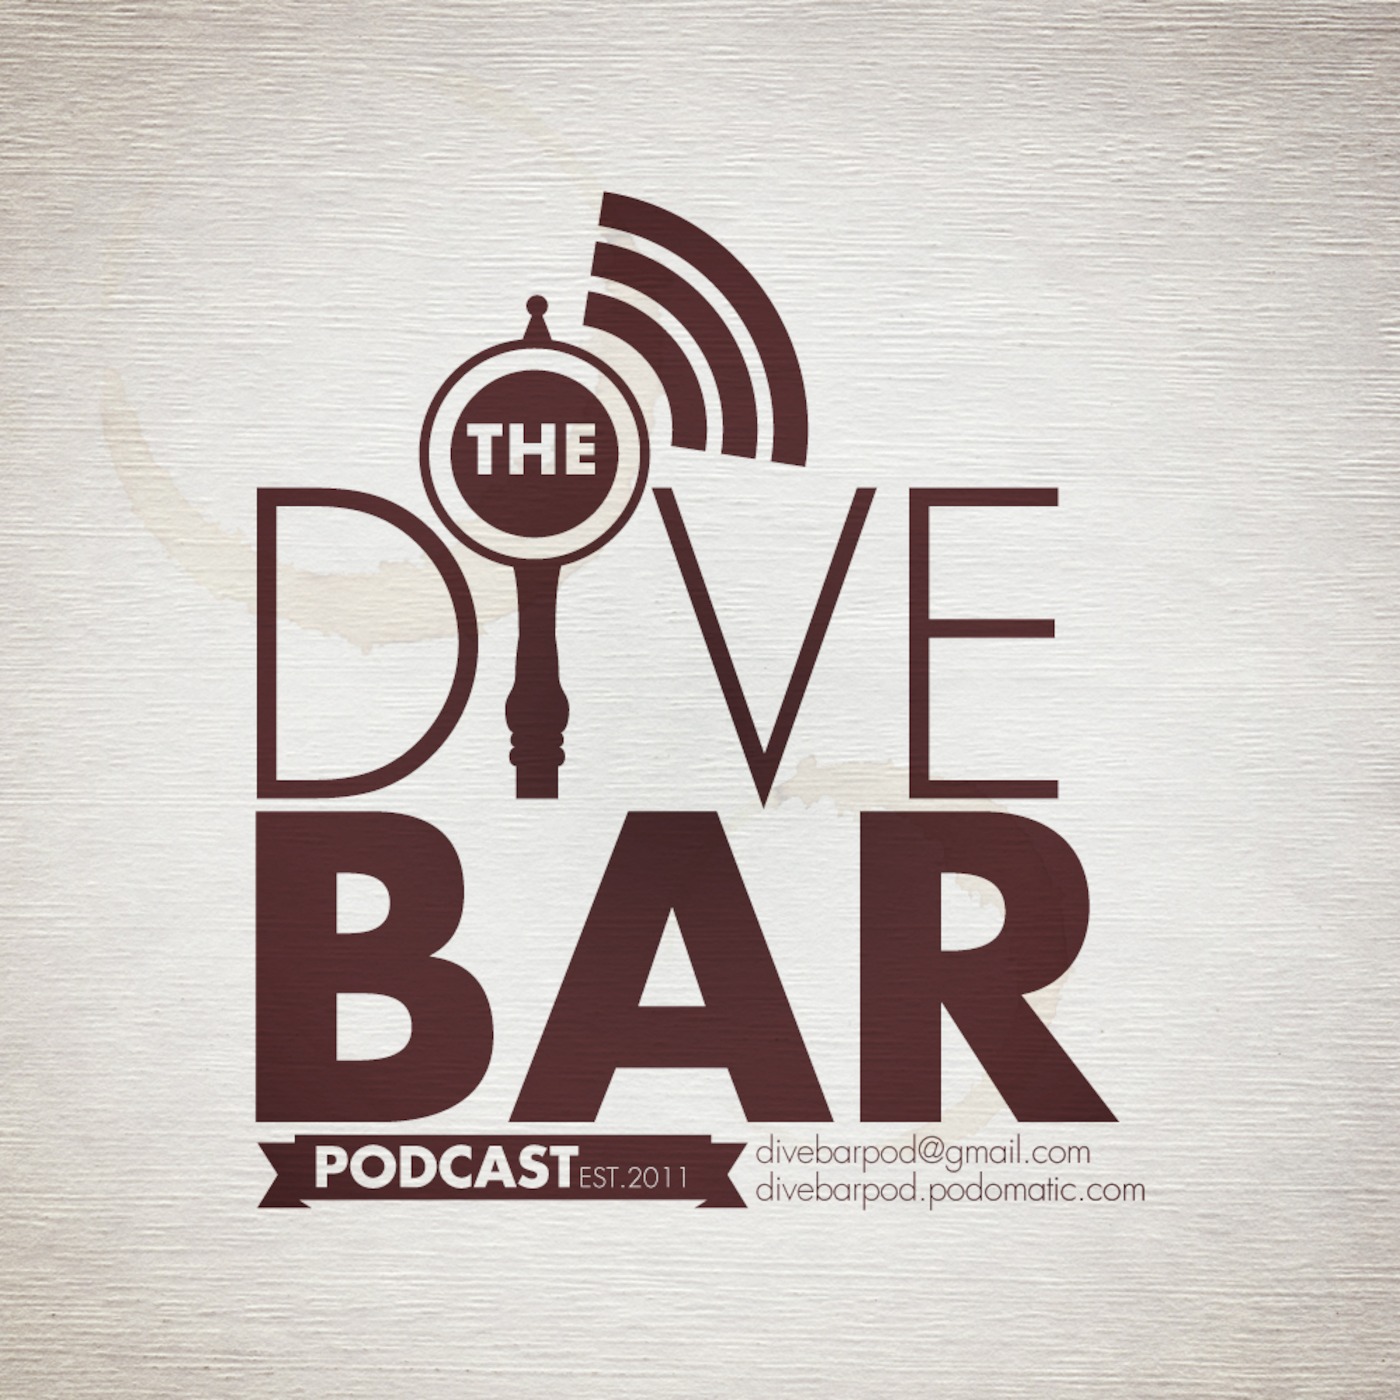 The Dive Bar Podcast